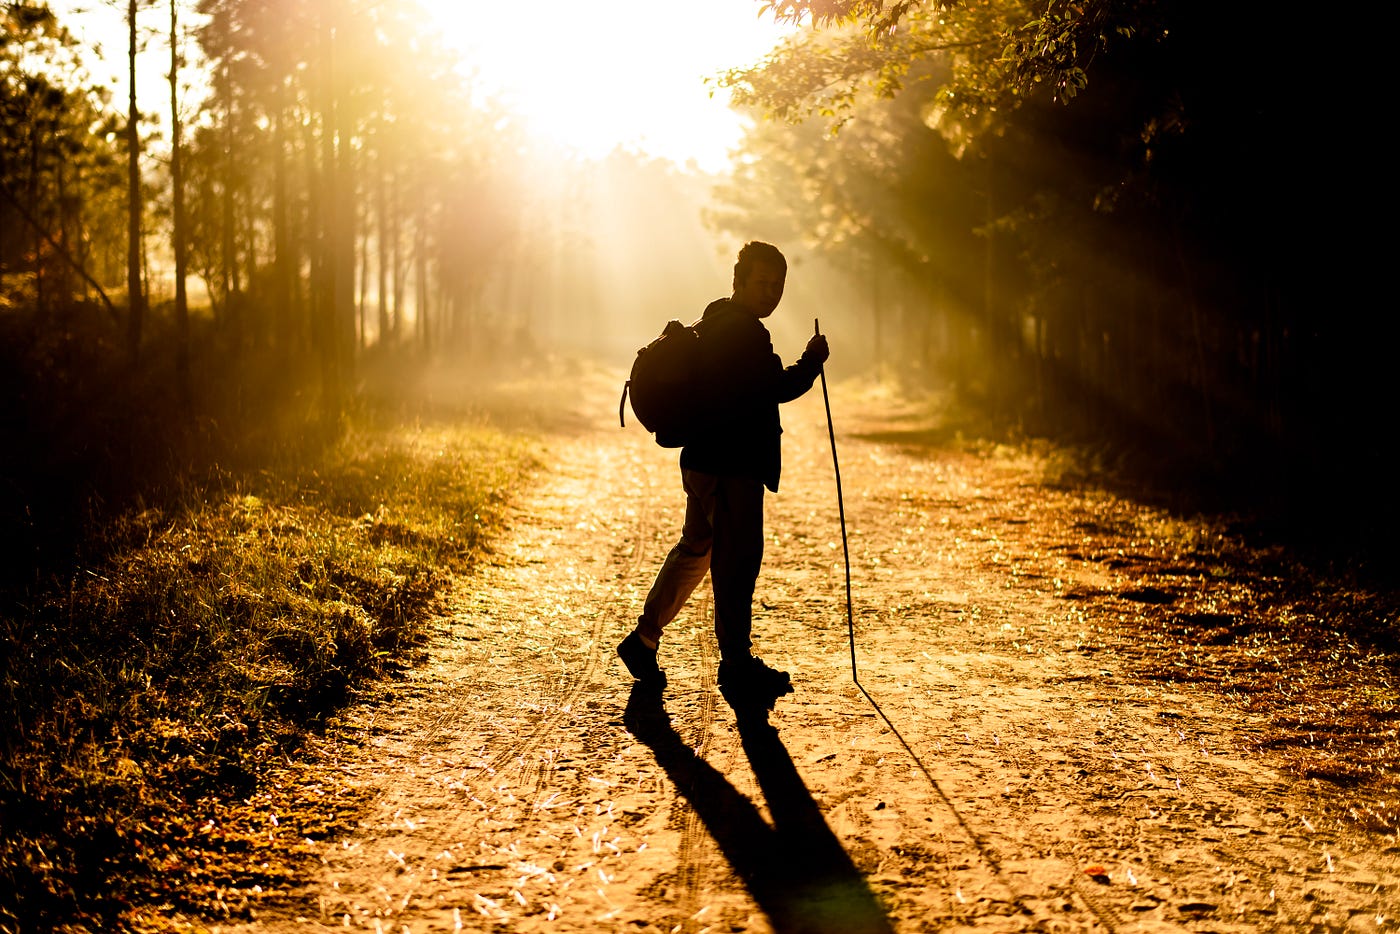 Man in silhouette walks in a woodsy area. He has walking sticks and a back back. The scene is in sepia, with the blazing sun in the middle background.